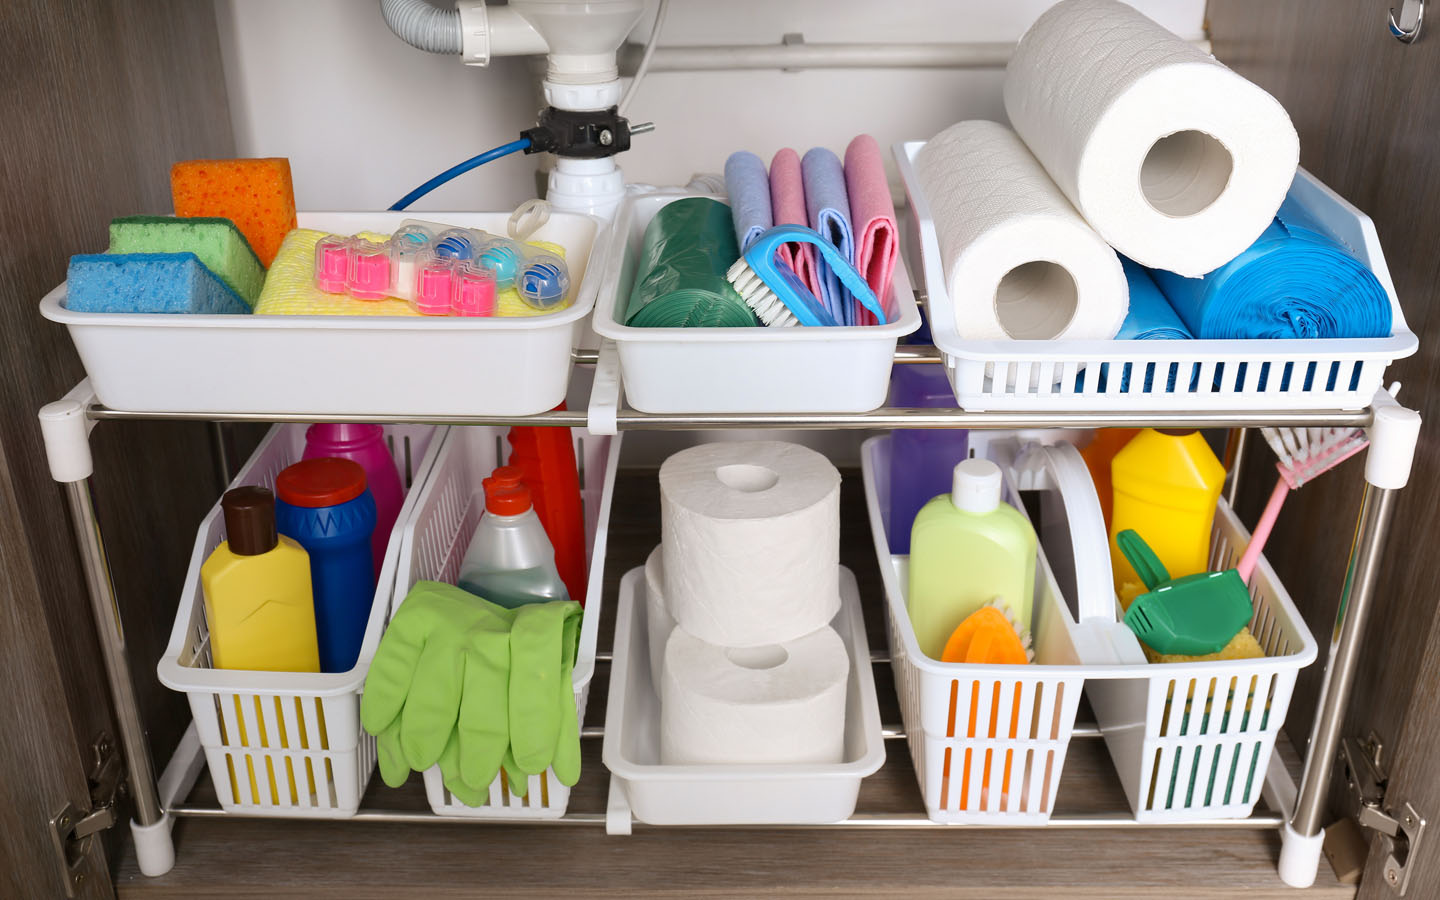 storing cleaning supplies under the sink